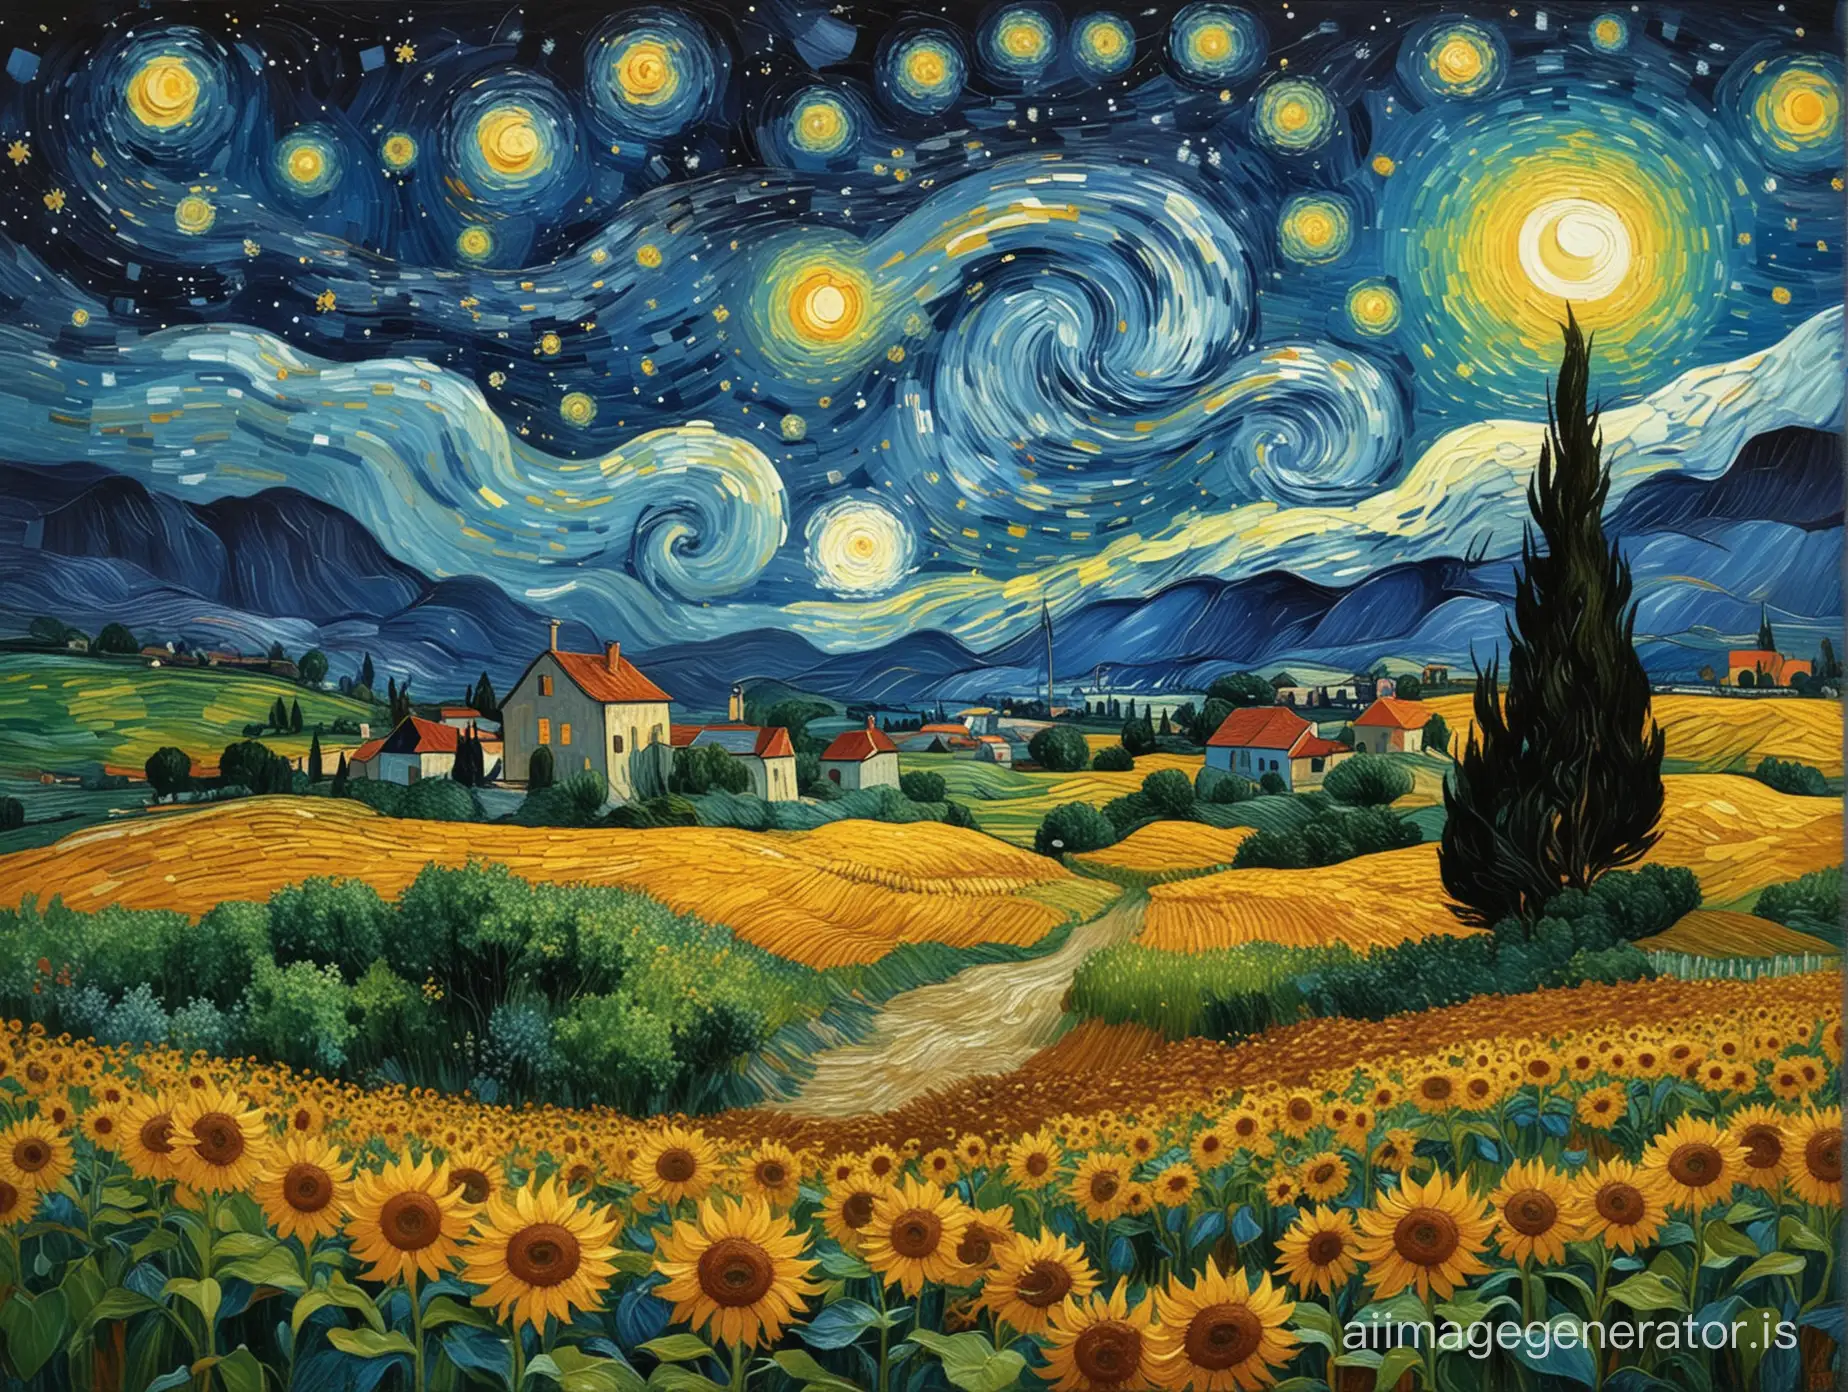 a high-quality symbiosis of van Gogh's "Starry Night" and "Sunflowers" paintings with bright colors and swirling strokes, with starry night skies, a peaceful village and rolling hills. There is only one lonely sunflower in the picture, the Scene should evoke a sense of calm and beauty, with a touch of impressionism and expressionism. Colours should be rich and bold, with quality similar to sleep. The general composition should be balanced and harmonious, reflecting the essence of the landscape, which is felt both habitually and otherworldly. The image should be detailed, with intricate textures and layers that add depth to the painting. This work should be suitable for gallery display, showcasing the beauty of nature in a unique and fascinating way.